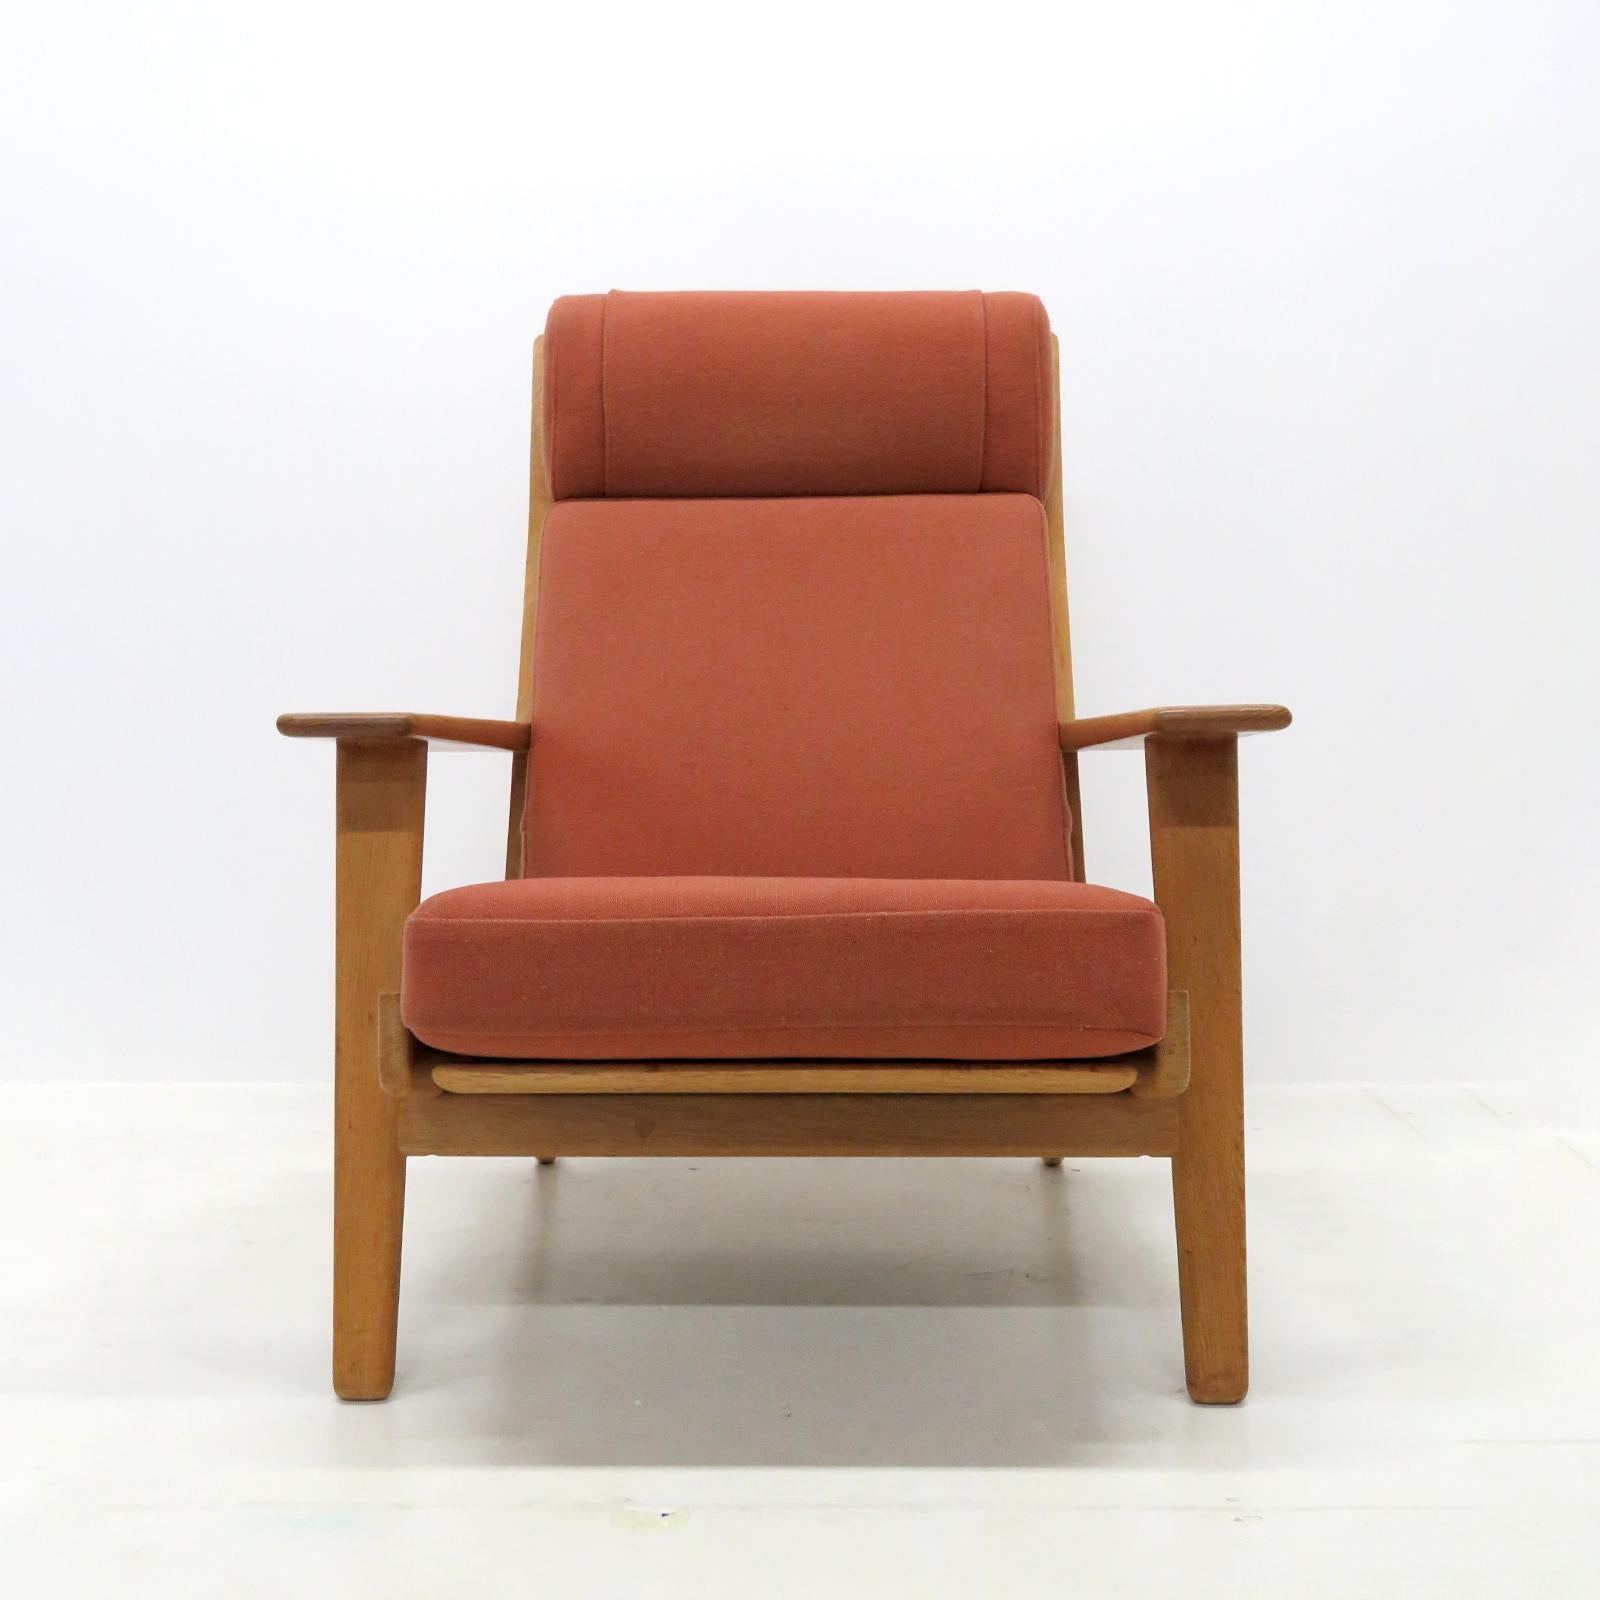 Wonderful high back lounge chair GE290A by Hans J Wegner for GETAMA, solid oak frame with nice patina and original cushions in light maroon wool fabric, marked.